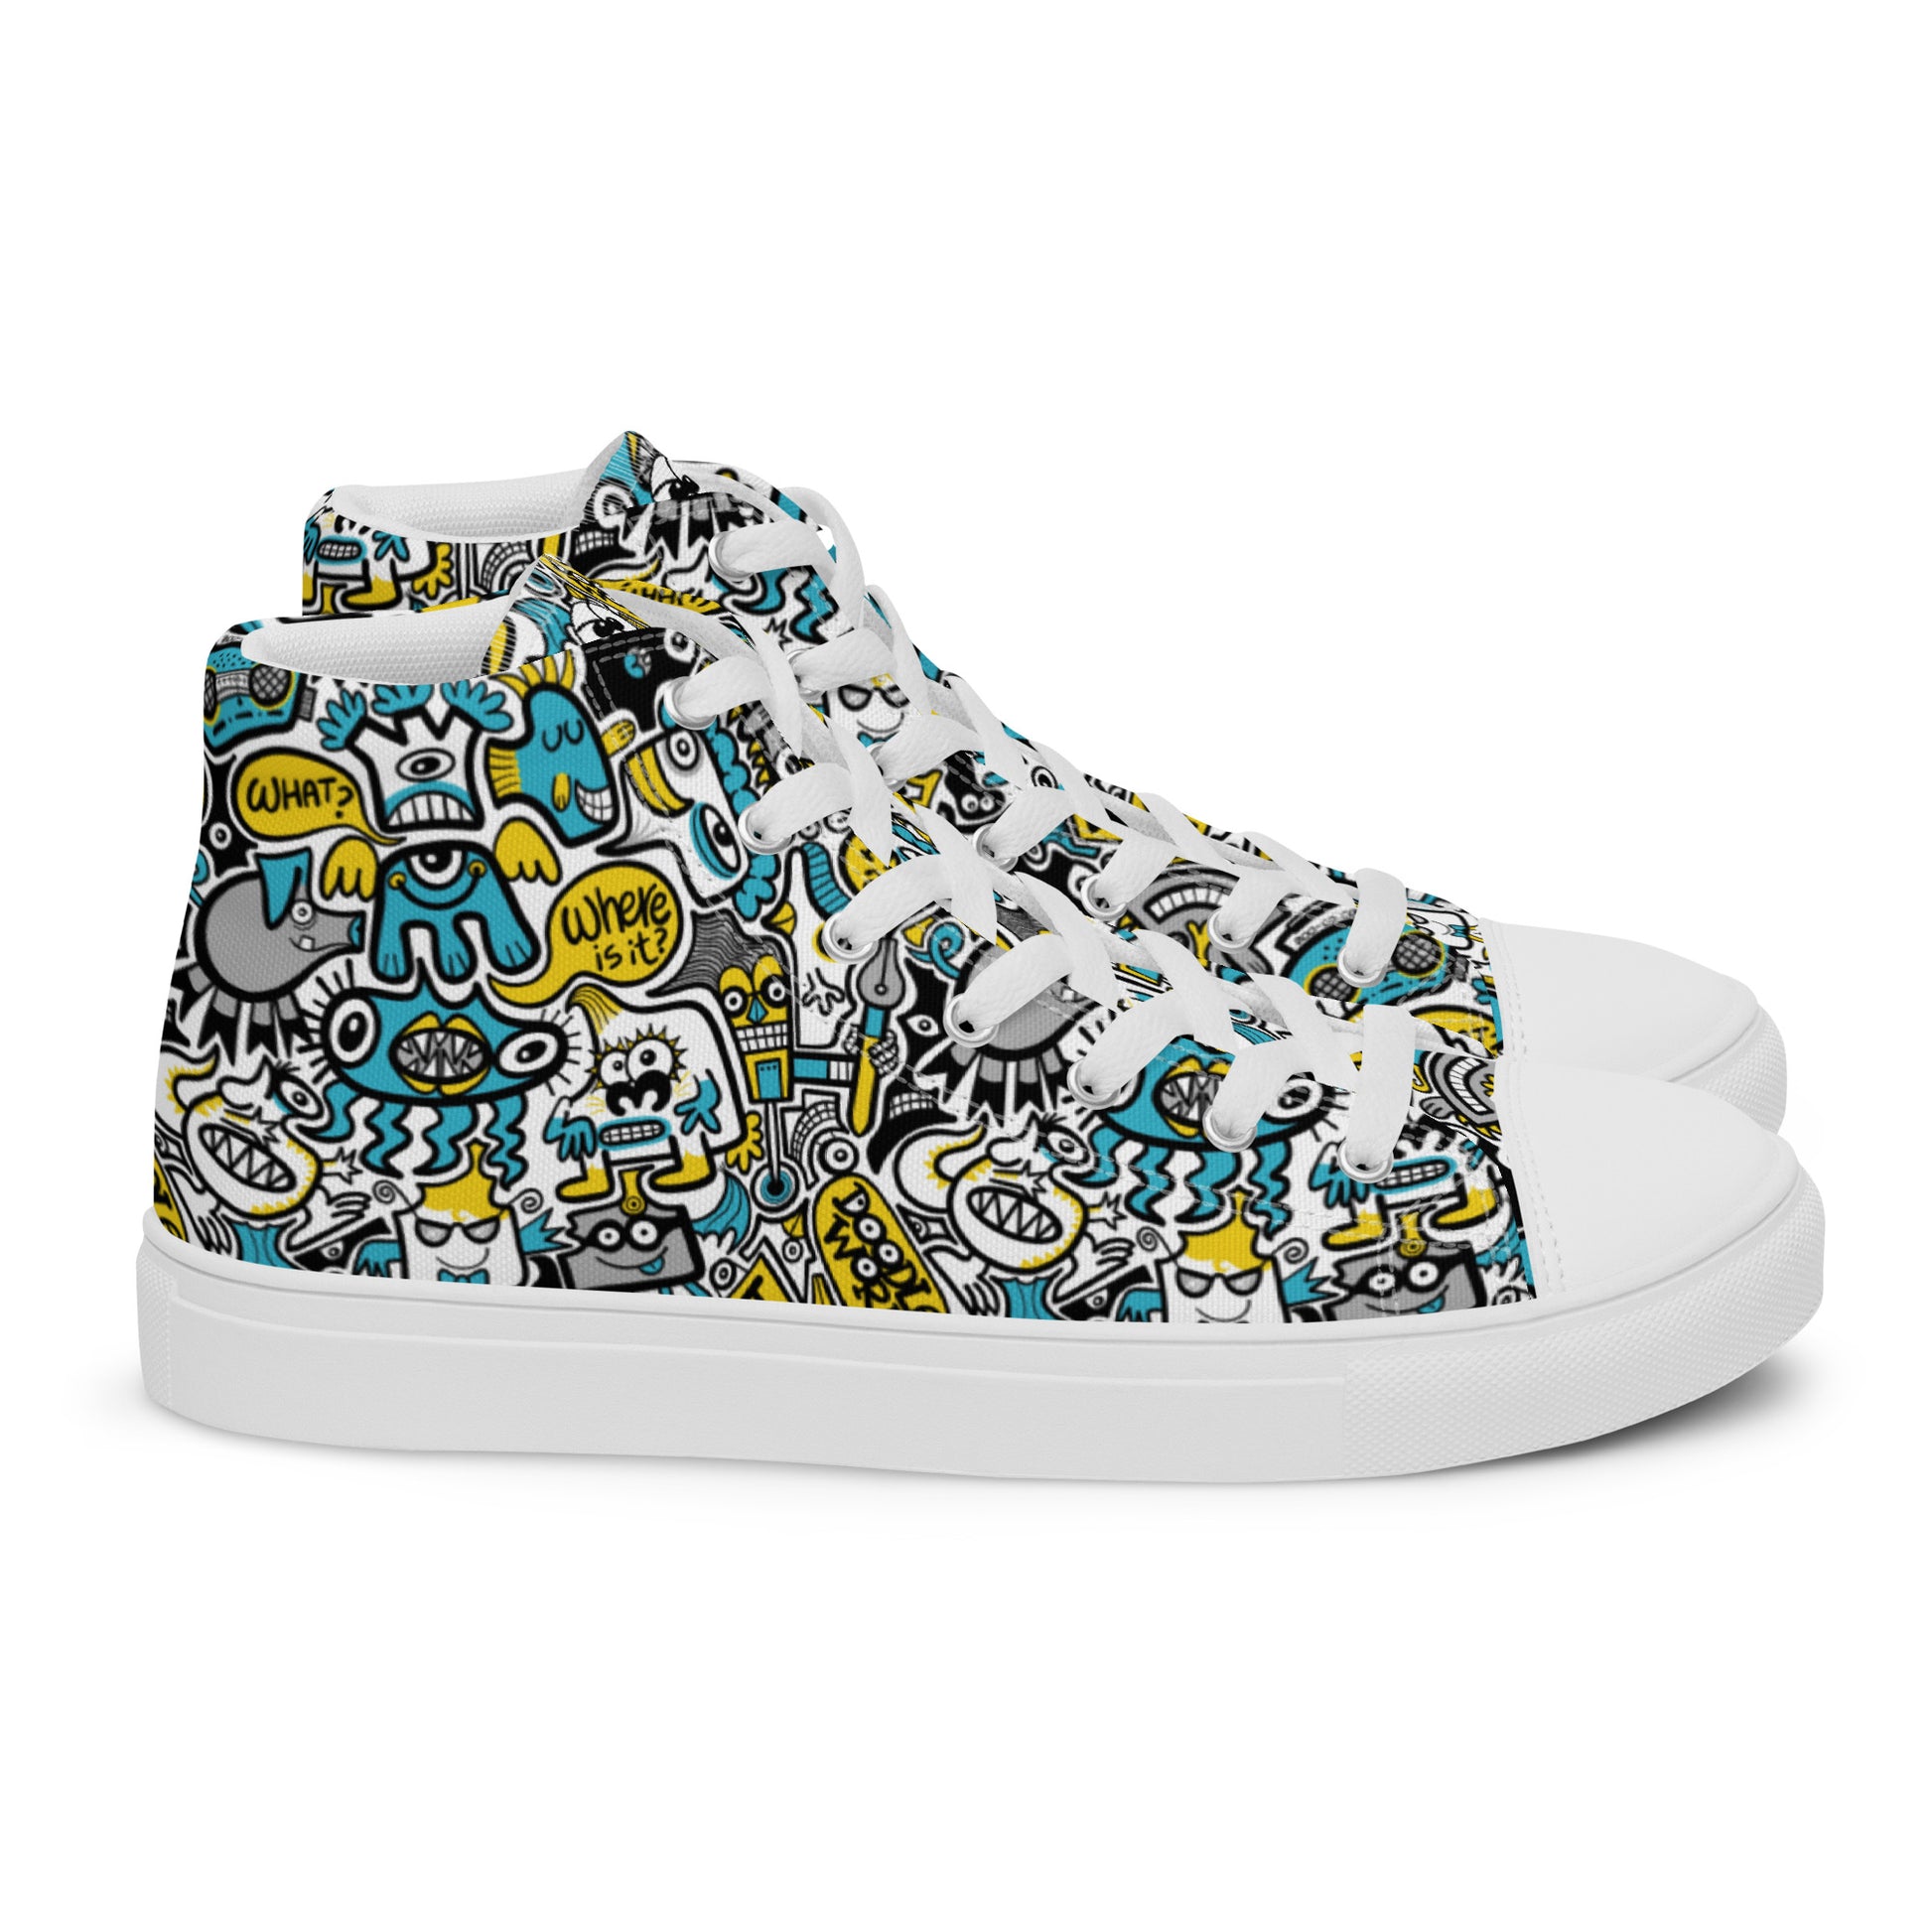 Discover a whole Doodle world buzzing in Lost city Women’s high top canvas shoes. Side view